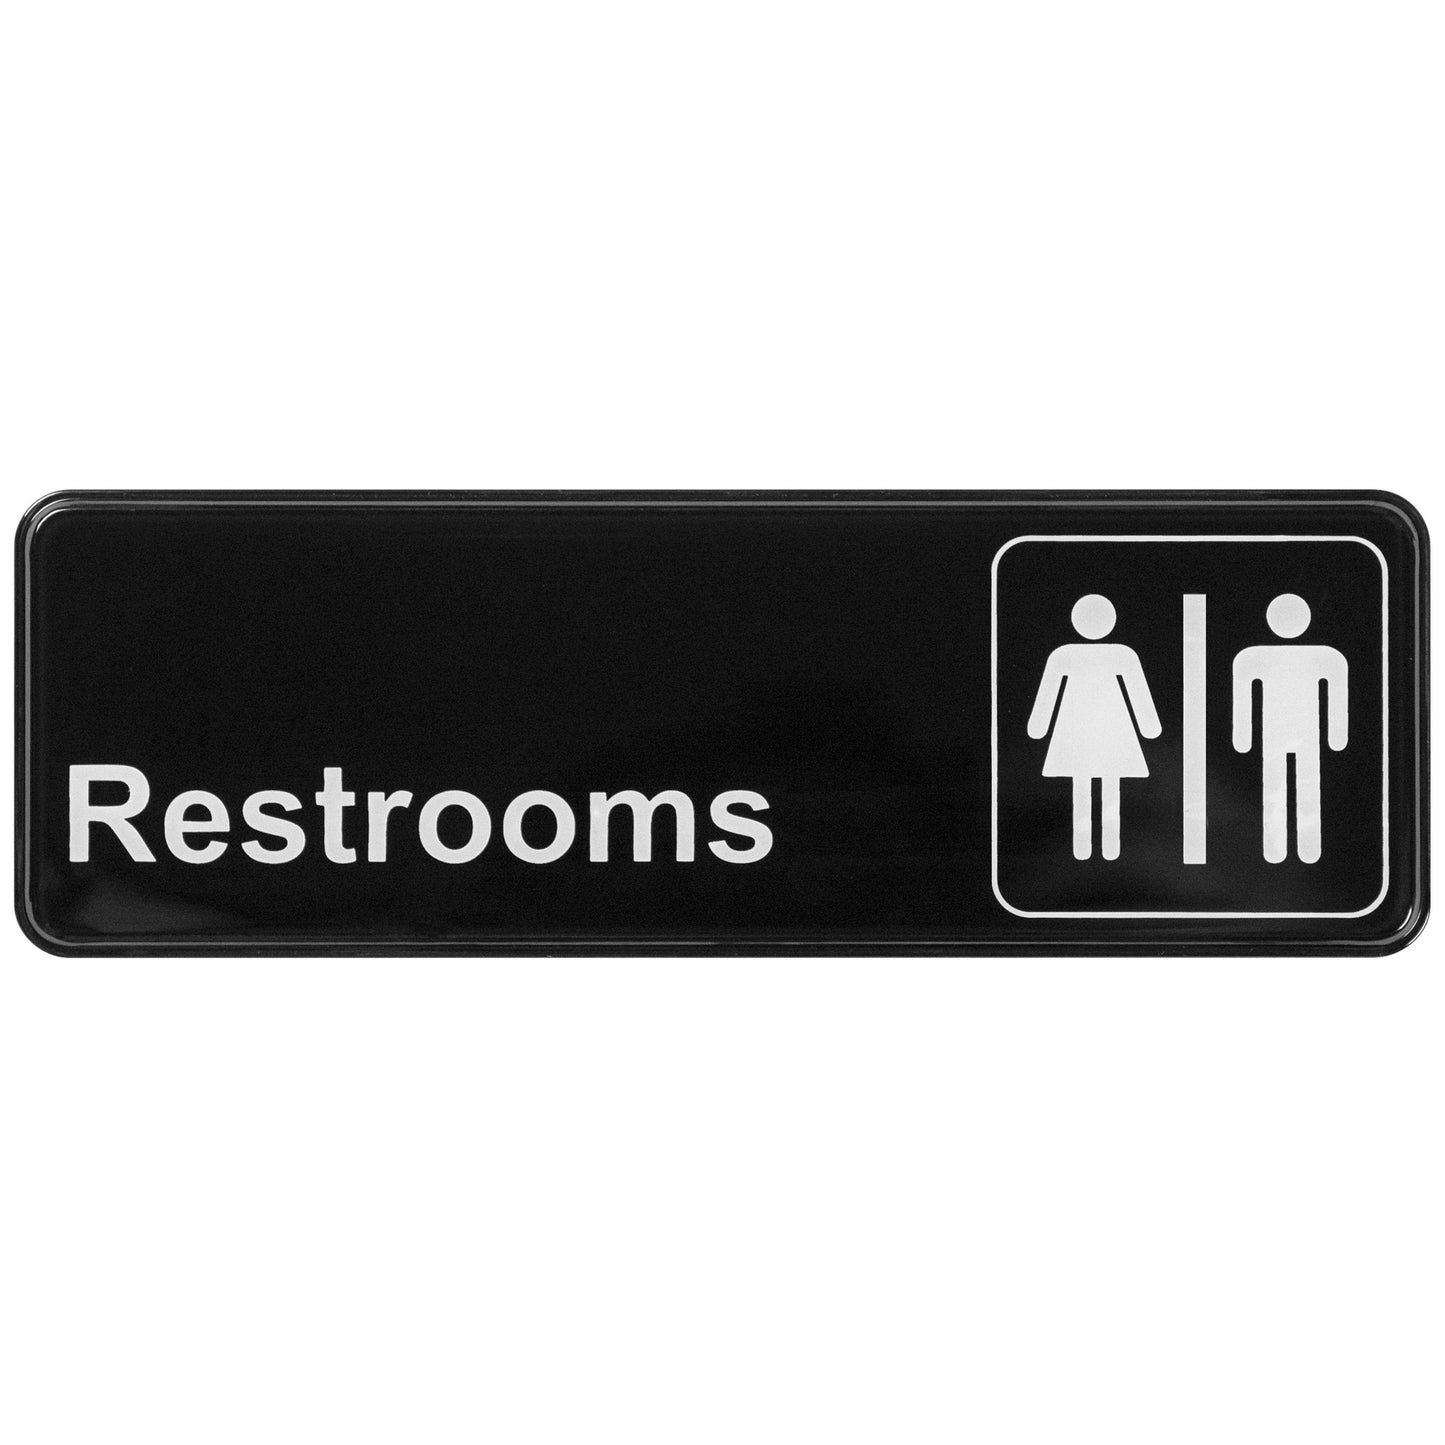 SGN-313 - Information Signs, 9"W x 3"H - SGN-313 - Restrooms